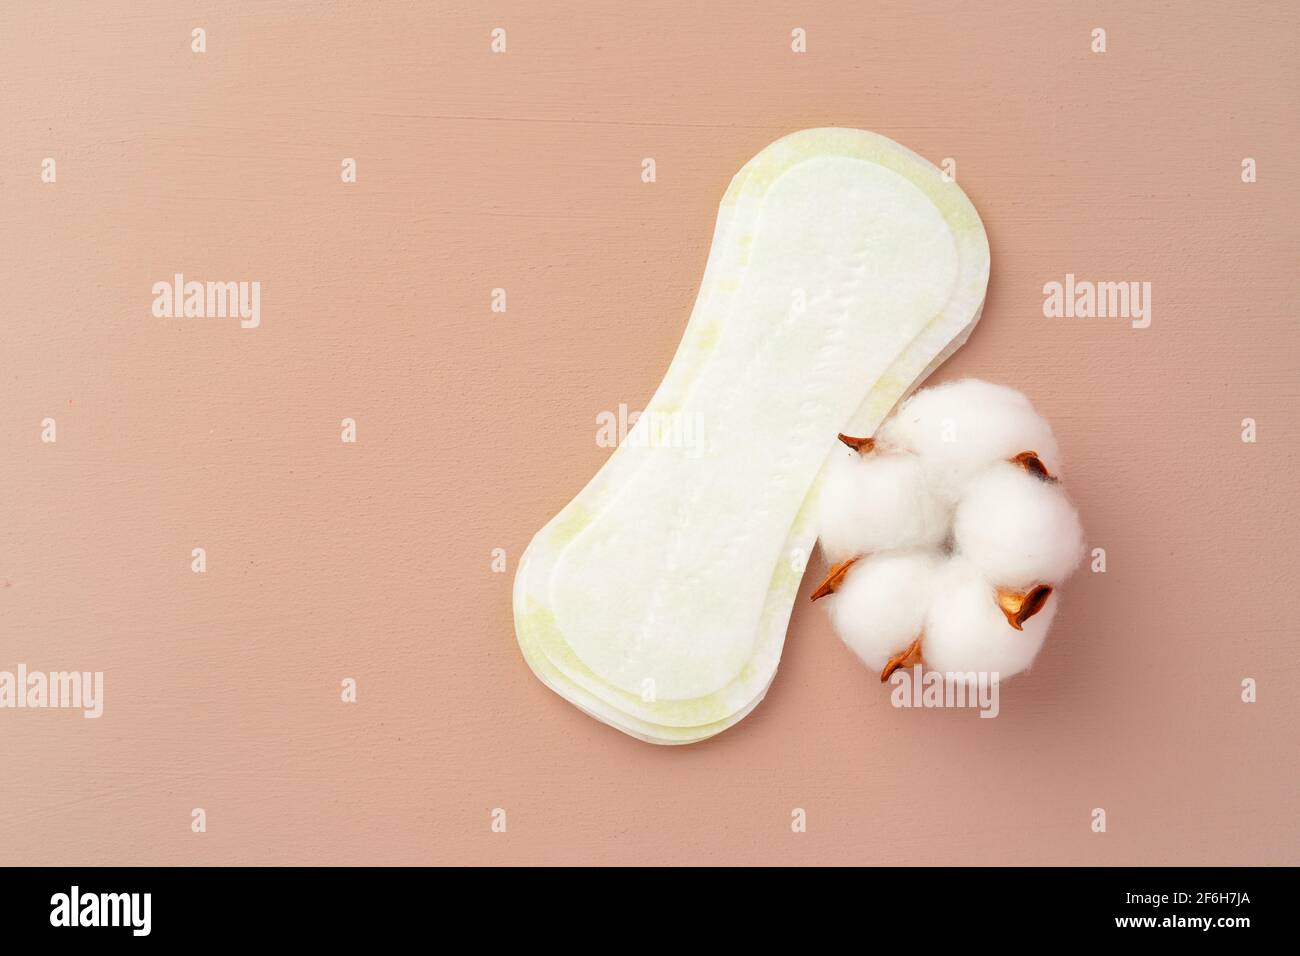 Women medical pads and cotton flower on paper background Stock Photo